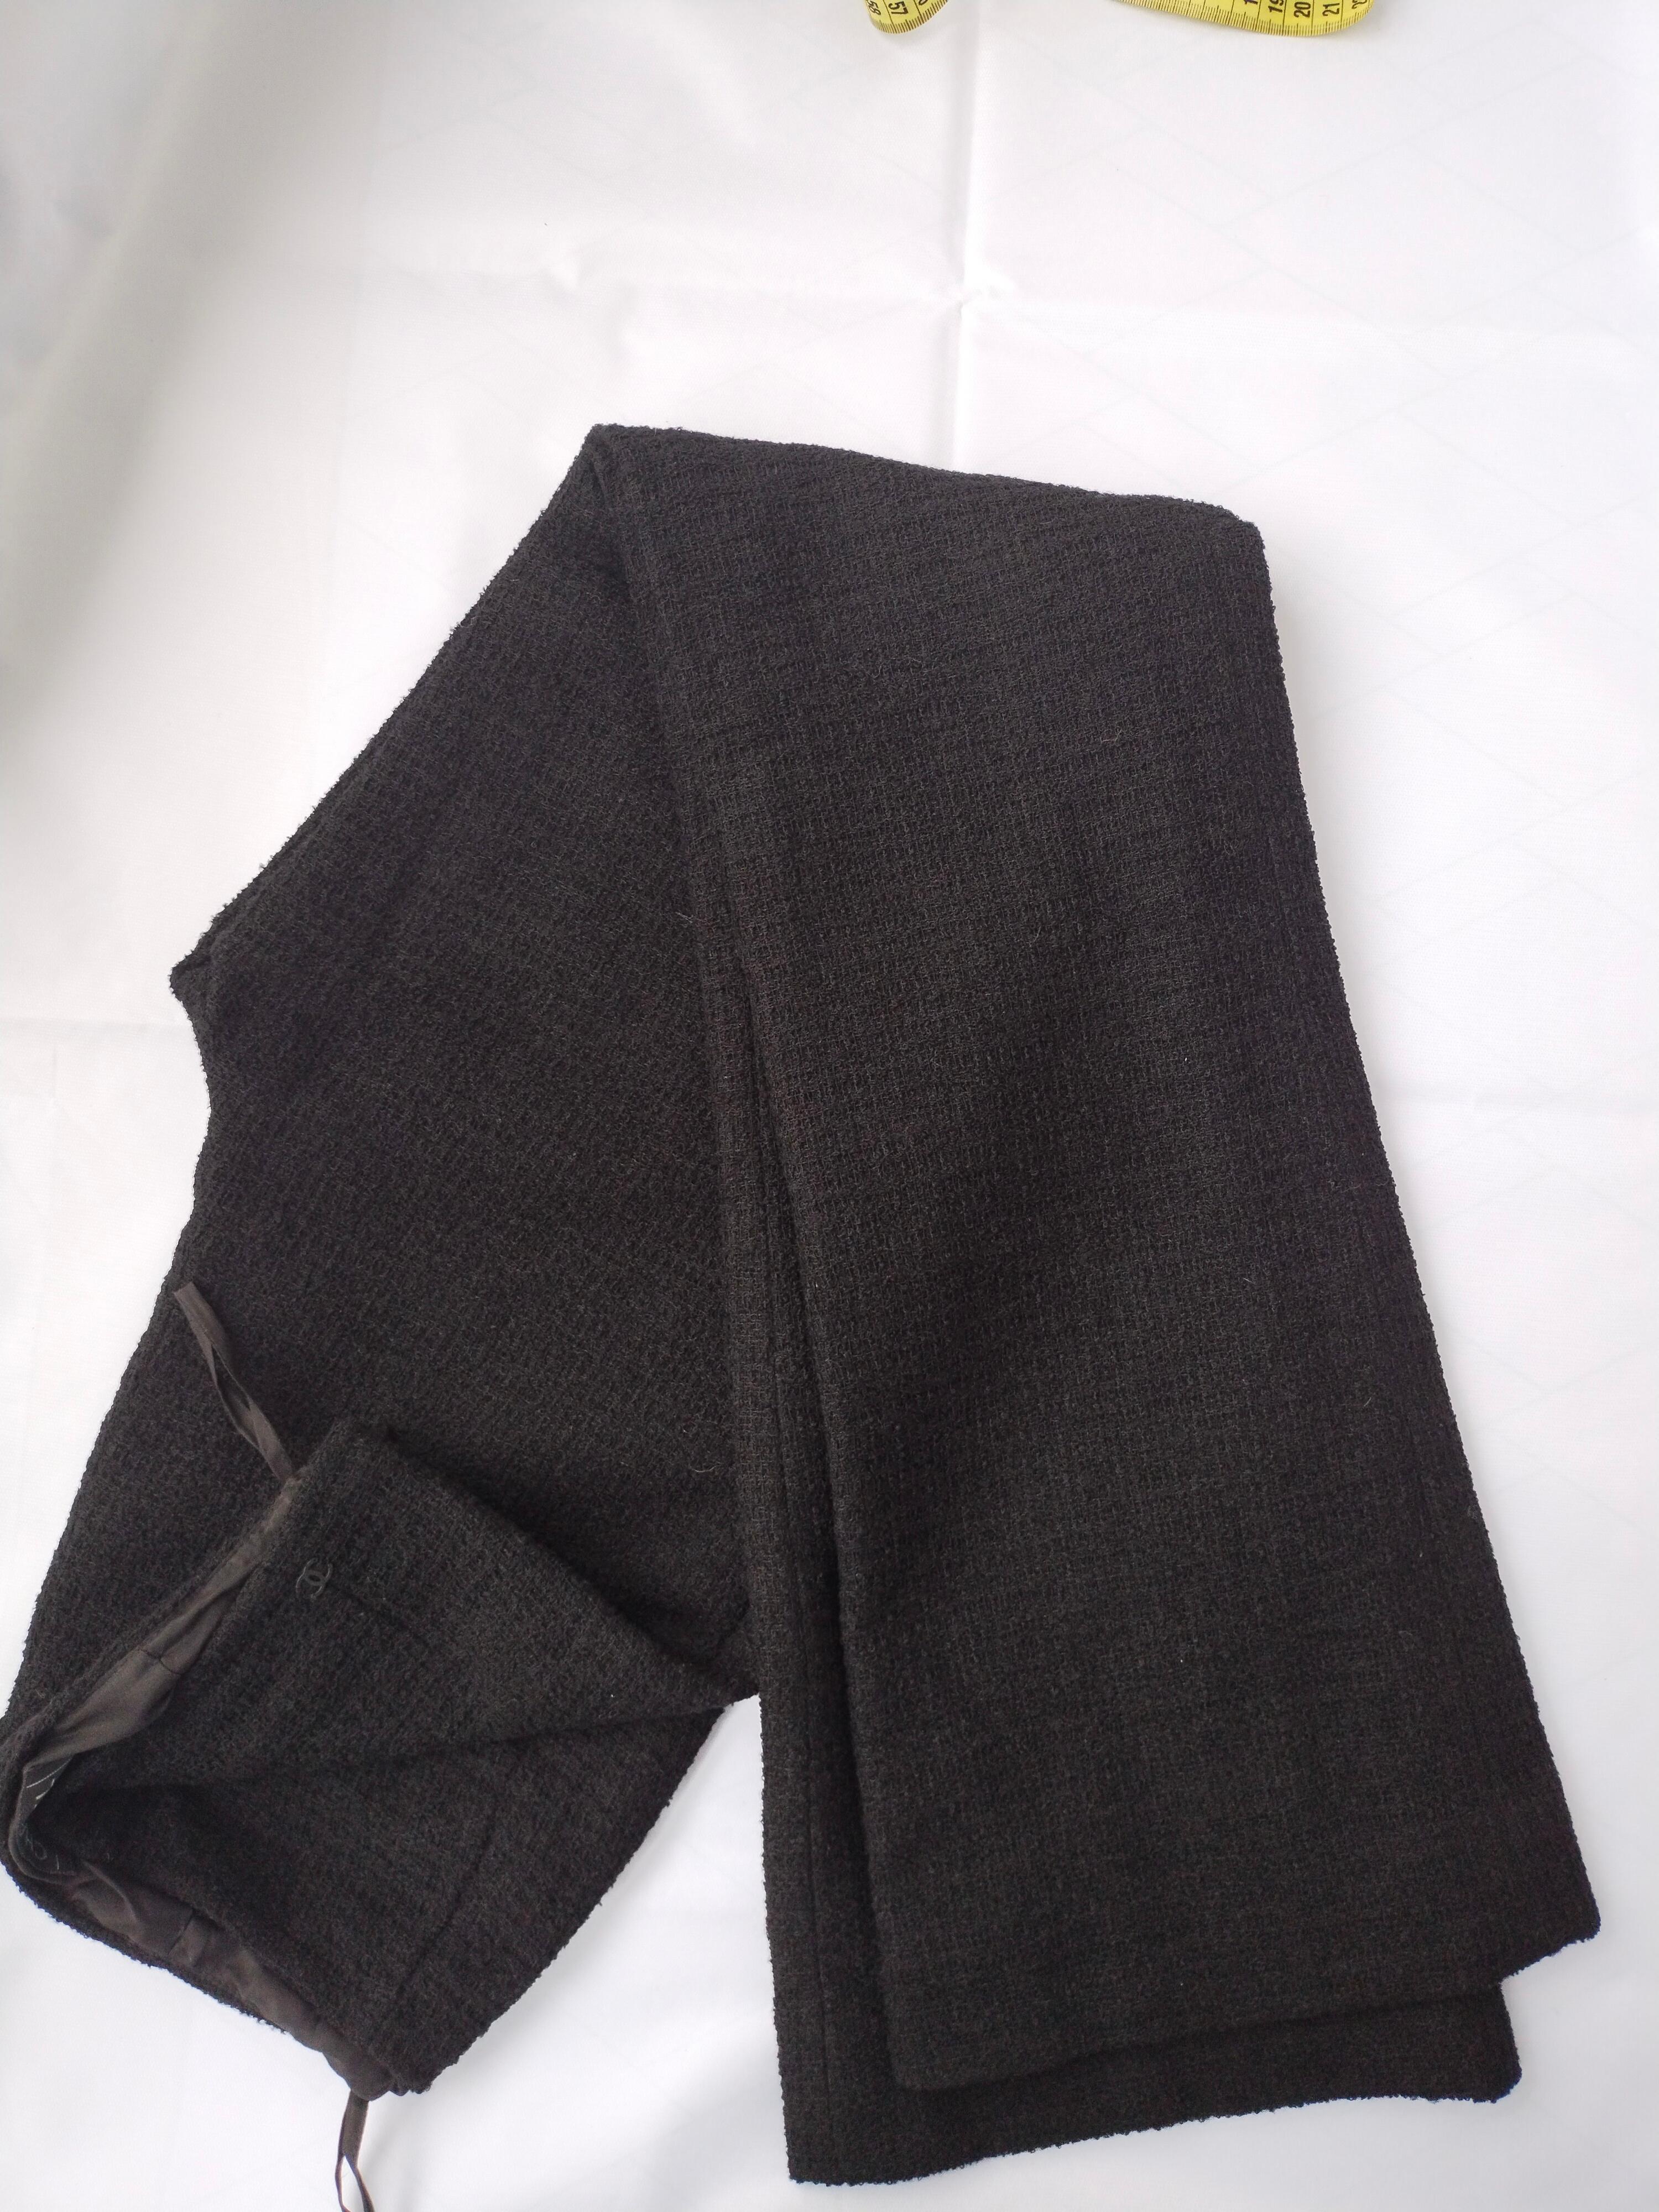 CHANEL 00A 2000 Fall runway Karl Lagerfeld tweed black trousers RTW For Sale 10